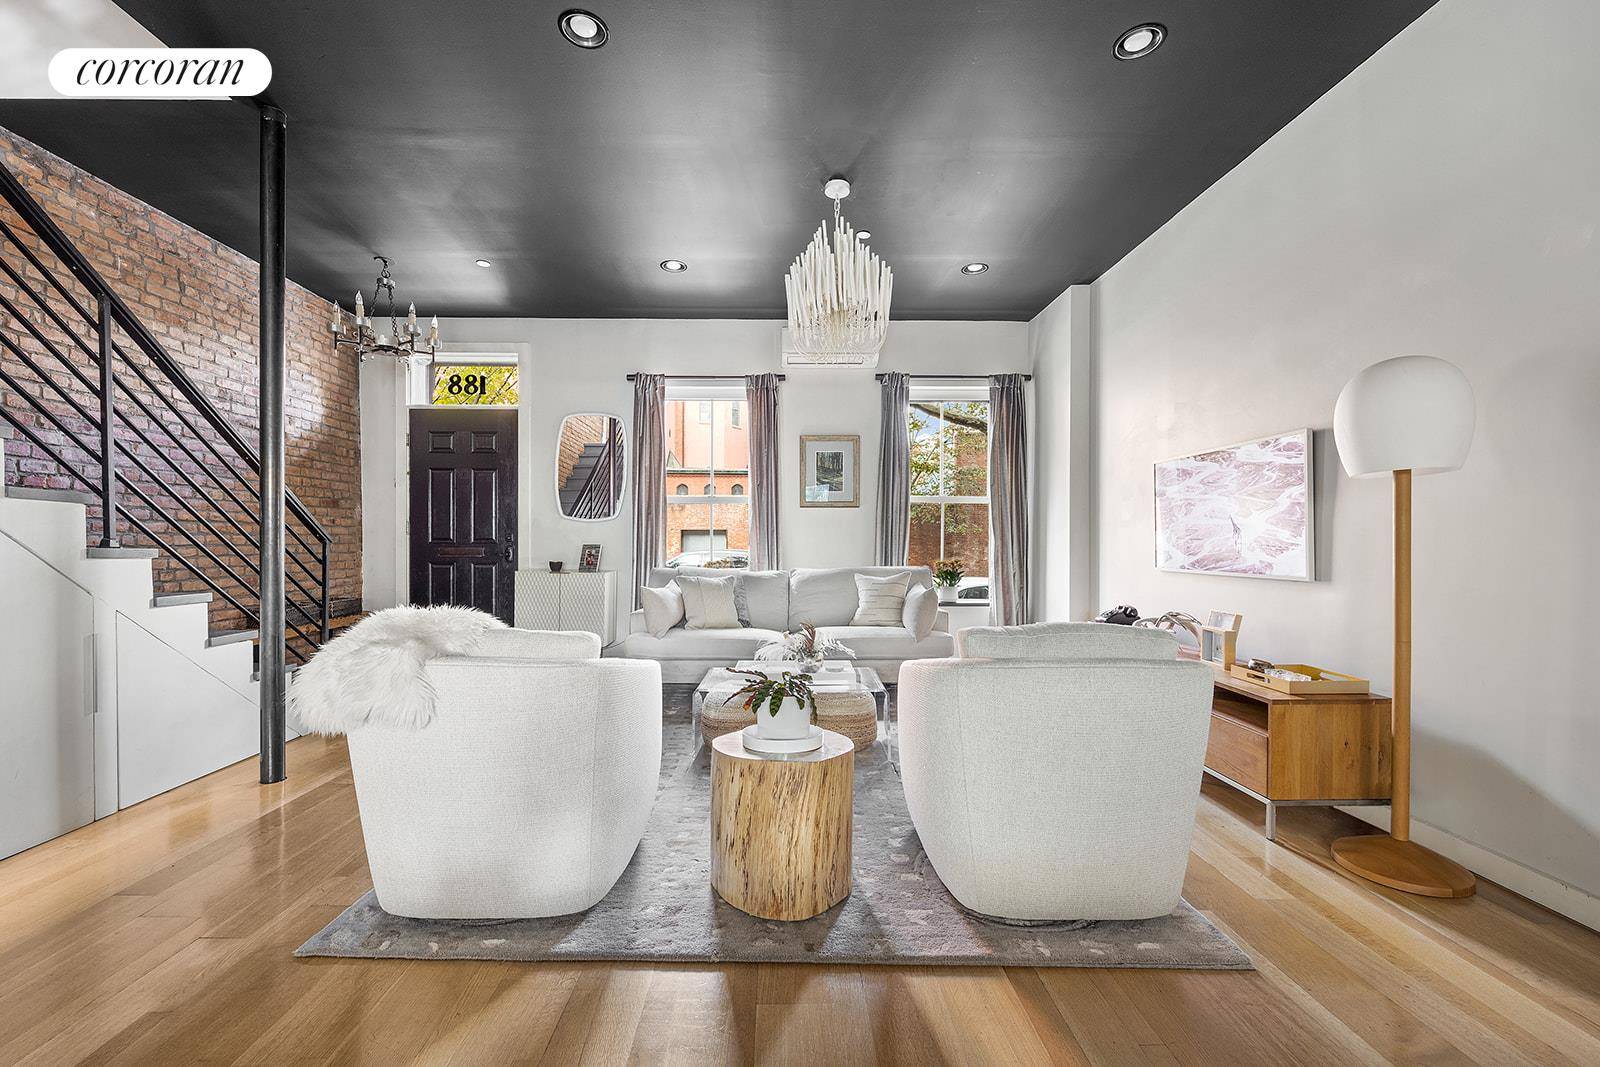 Impeccably renovated from top to bottom, this spectacular Carroll Gardens home is wonderfully designed to maximize space and offer fantastic flexibility of use.